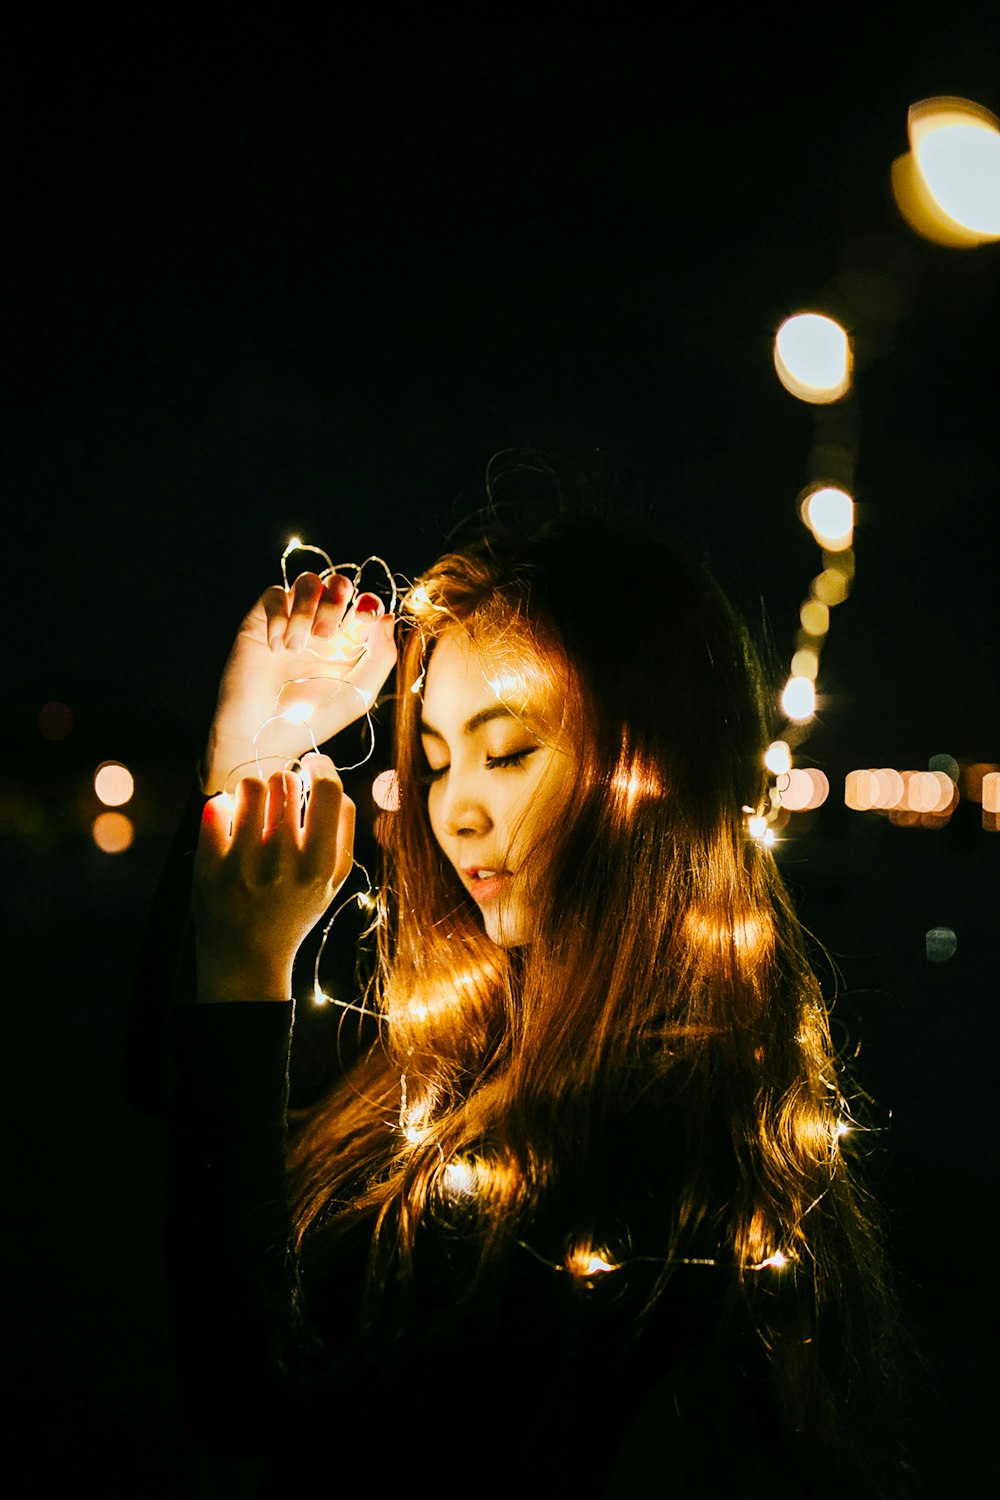 Bokeh photography of woman holding string lights photo Free Person Image on Unsplash